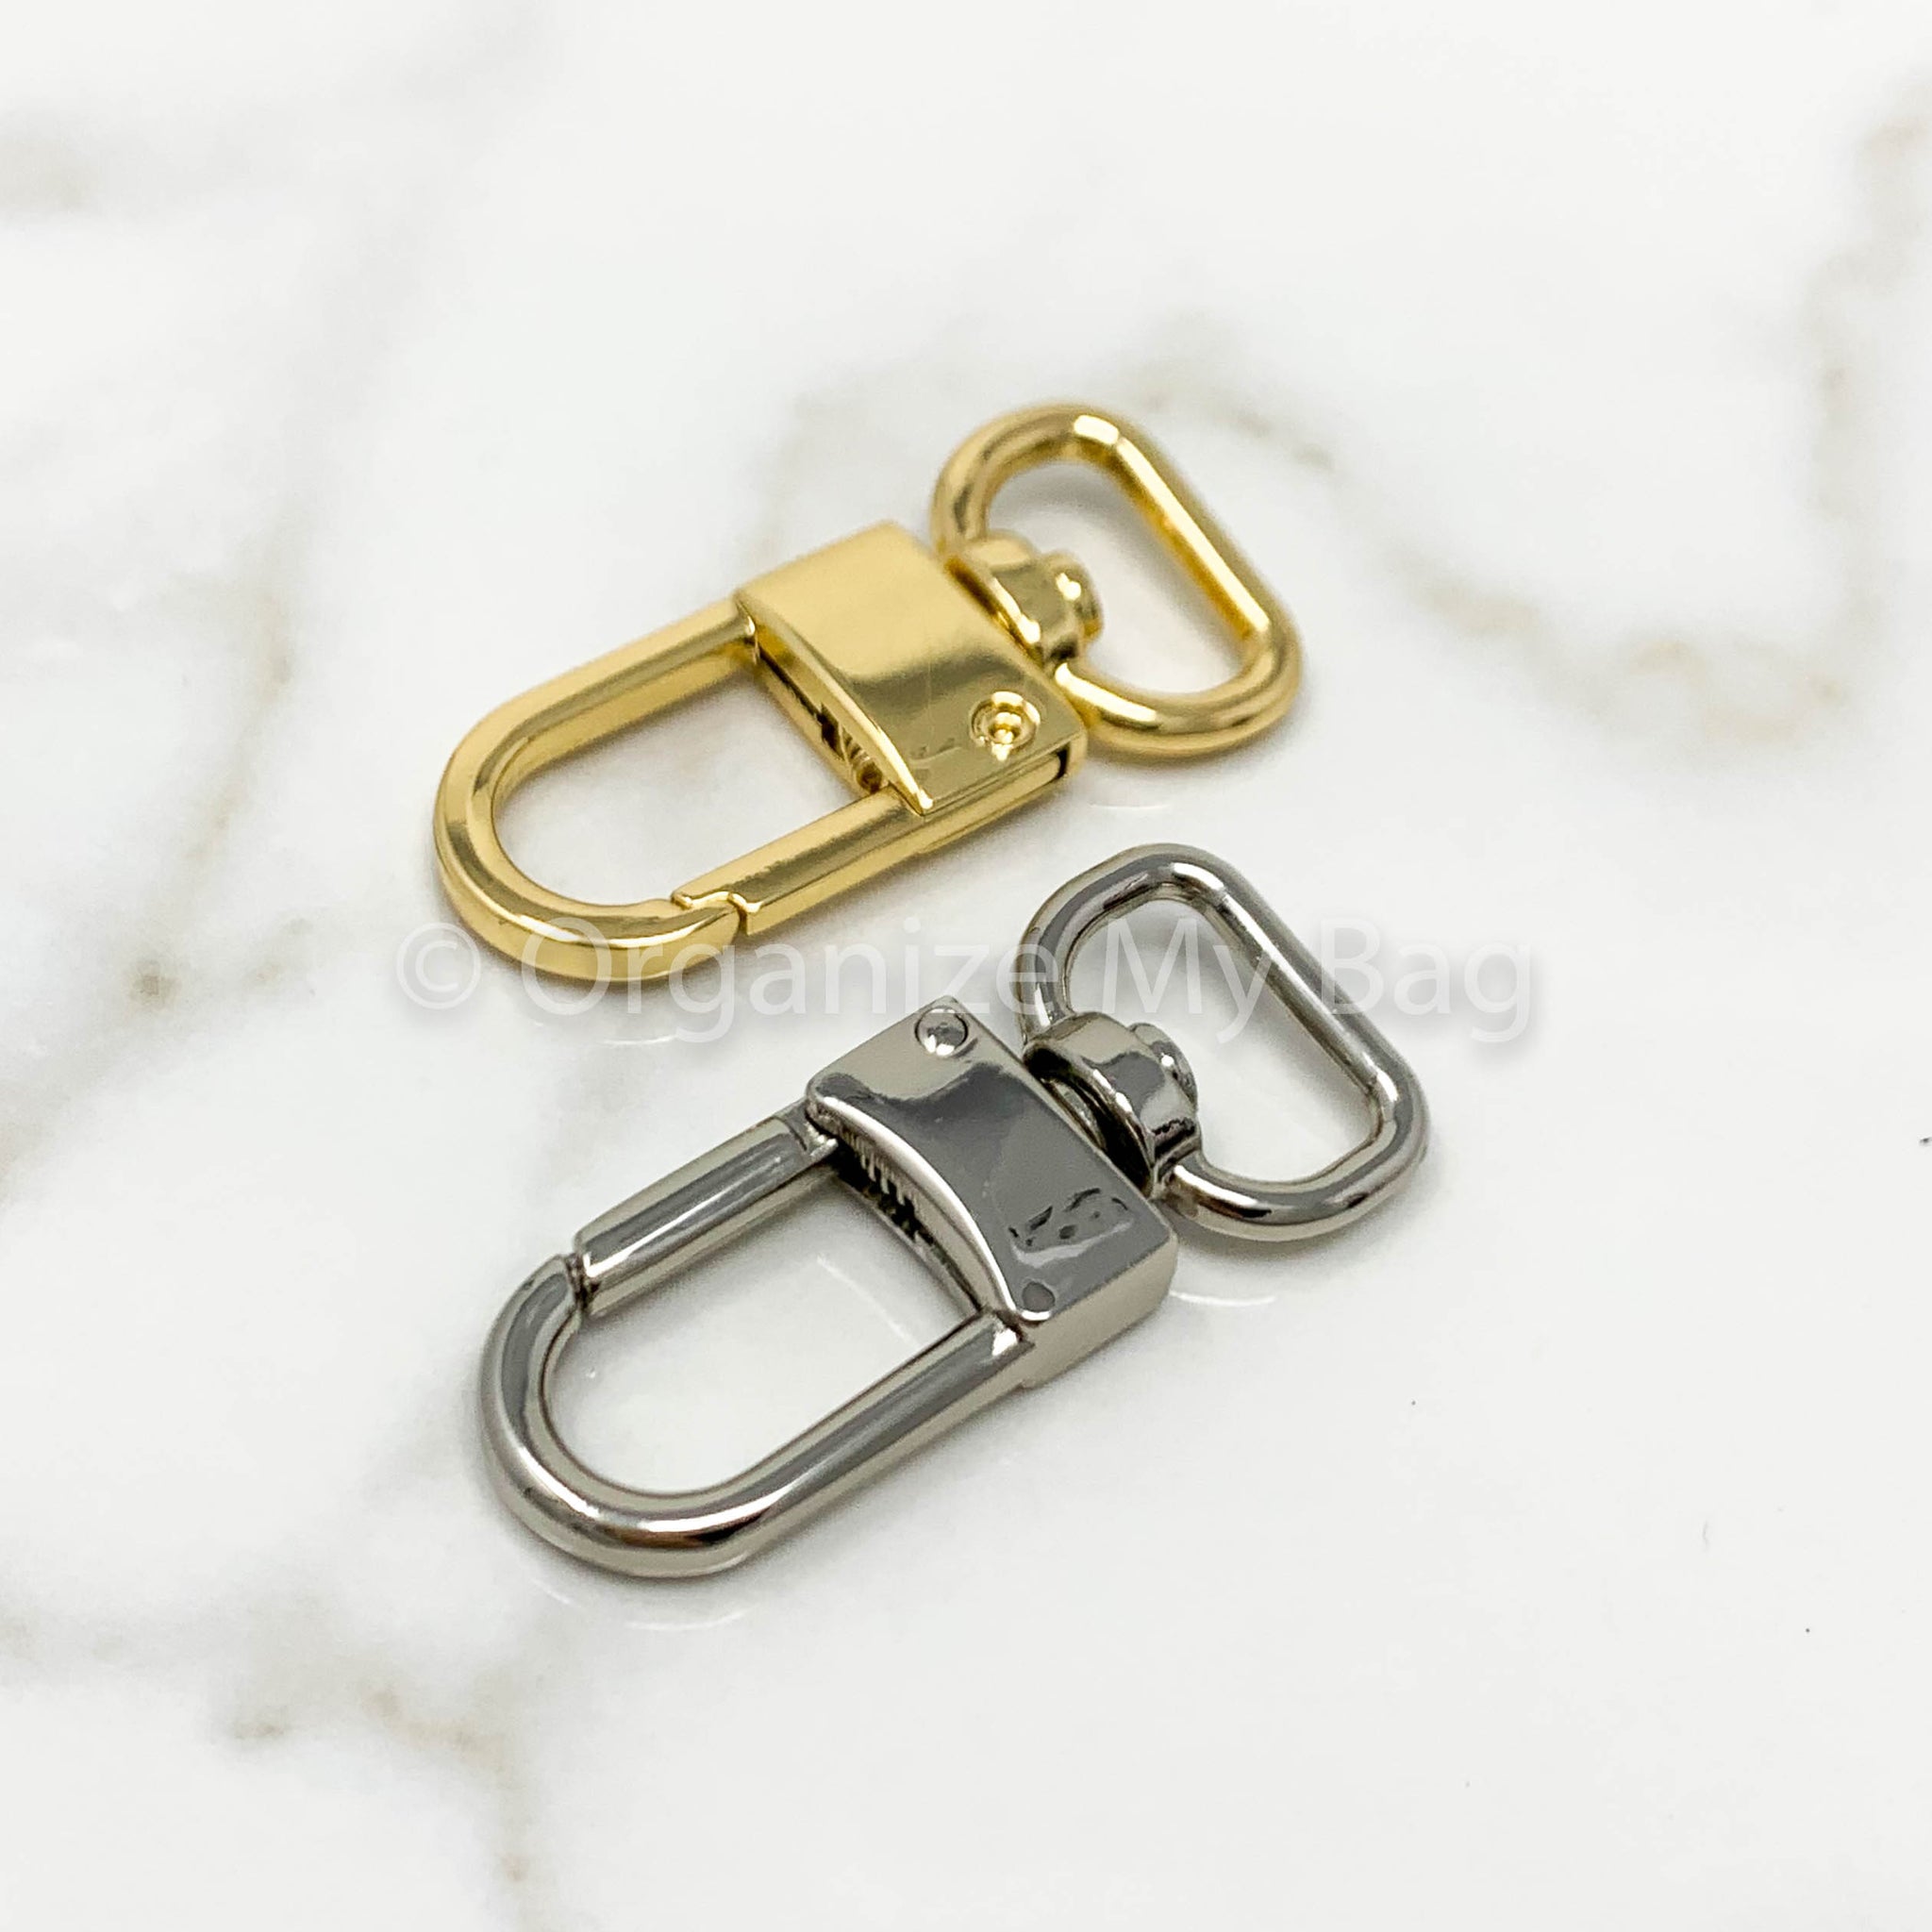 Clips for Bag/Luggage Tags - Two Sizes - Gold or Nickel